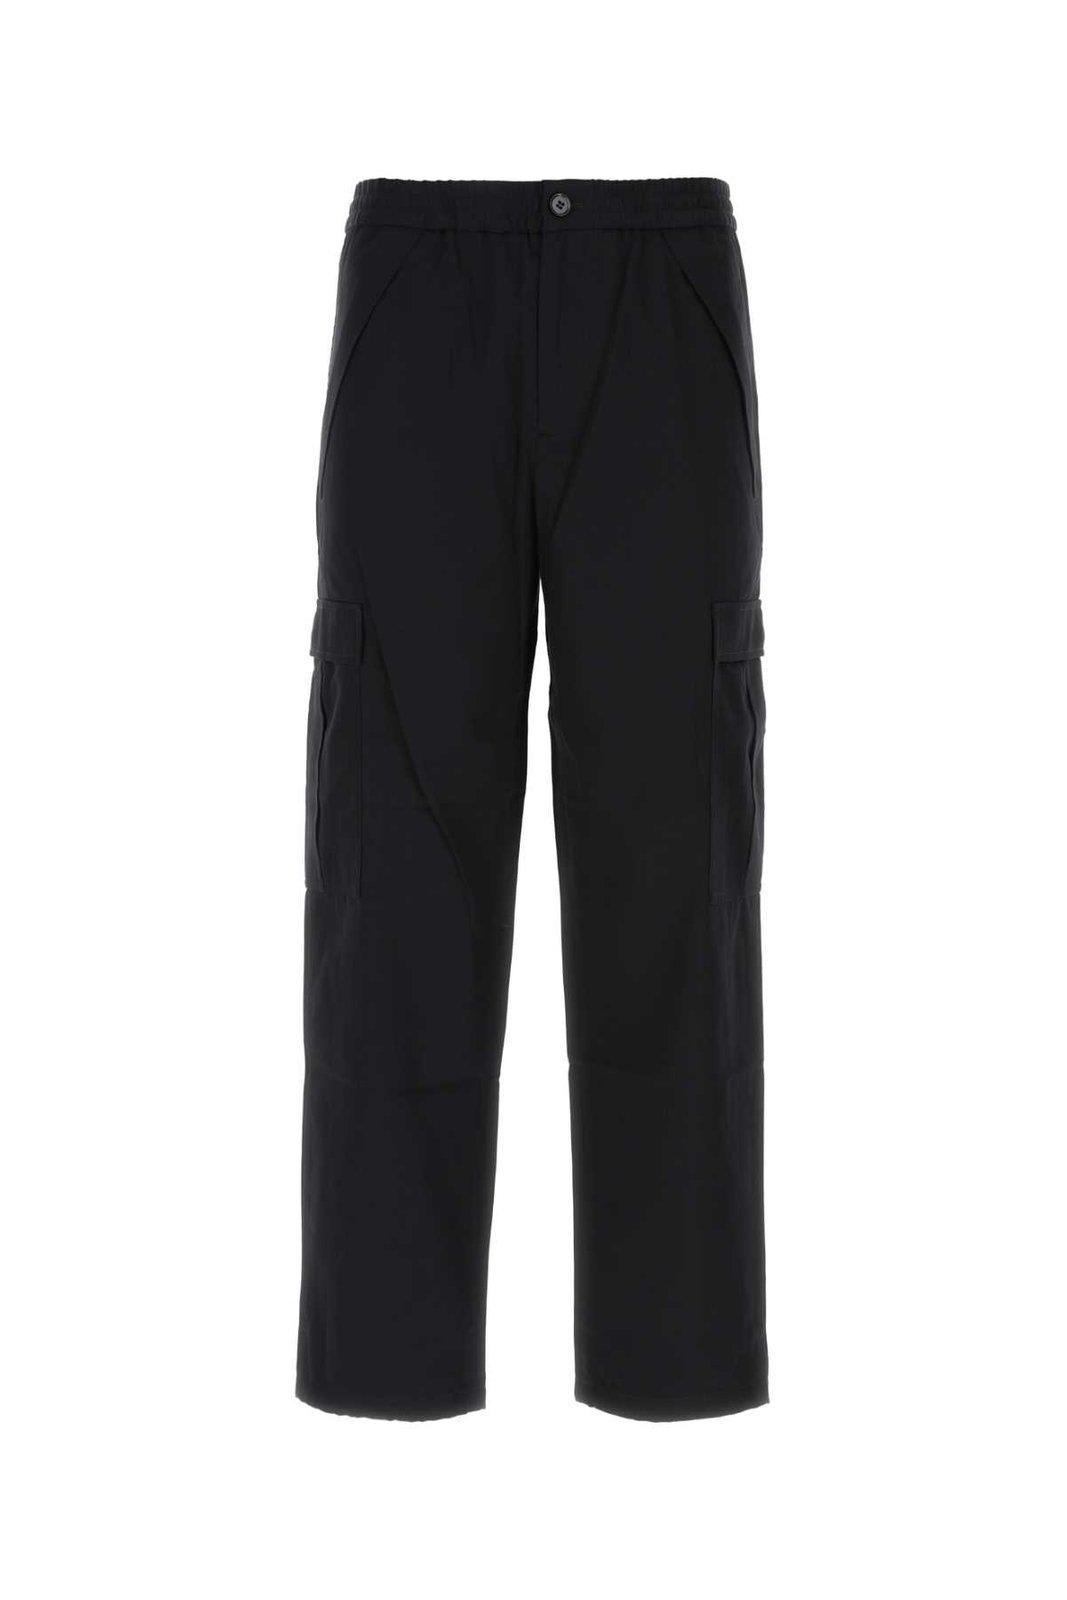 BURBERRY MID RISE CARGO TROUSERS